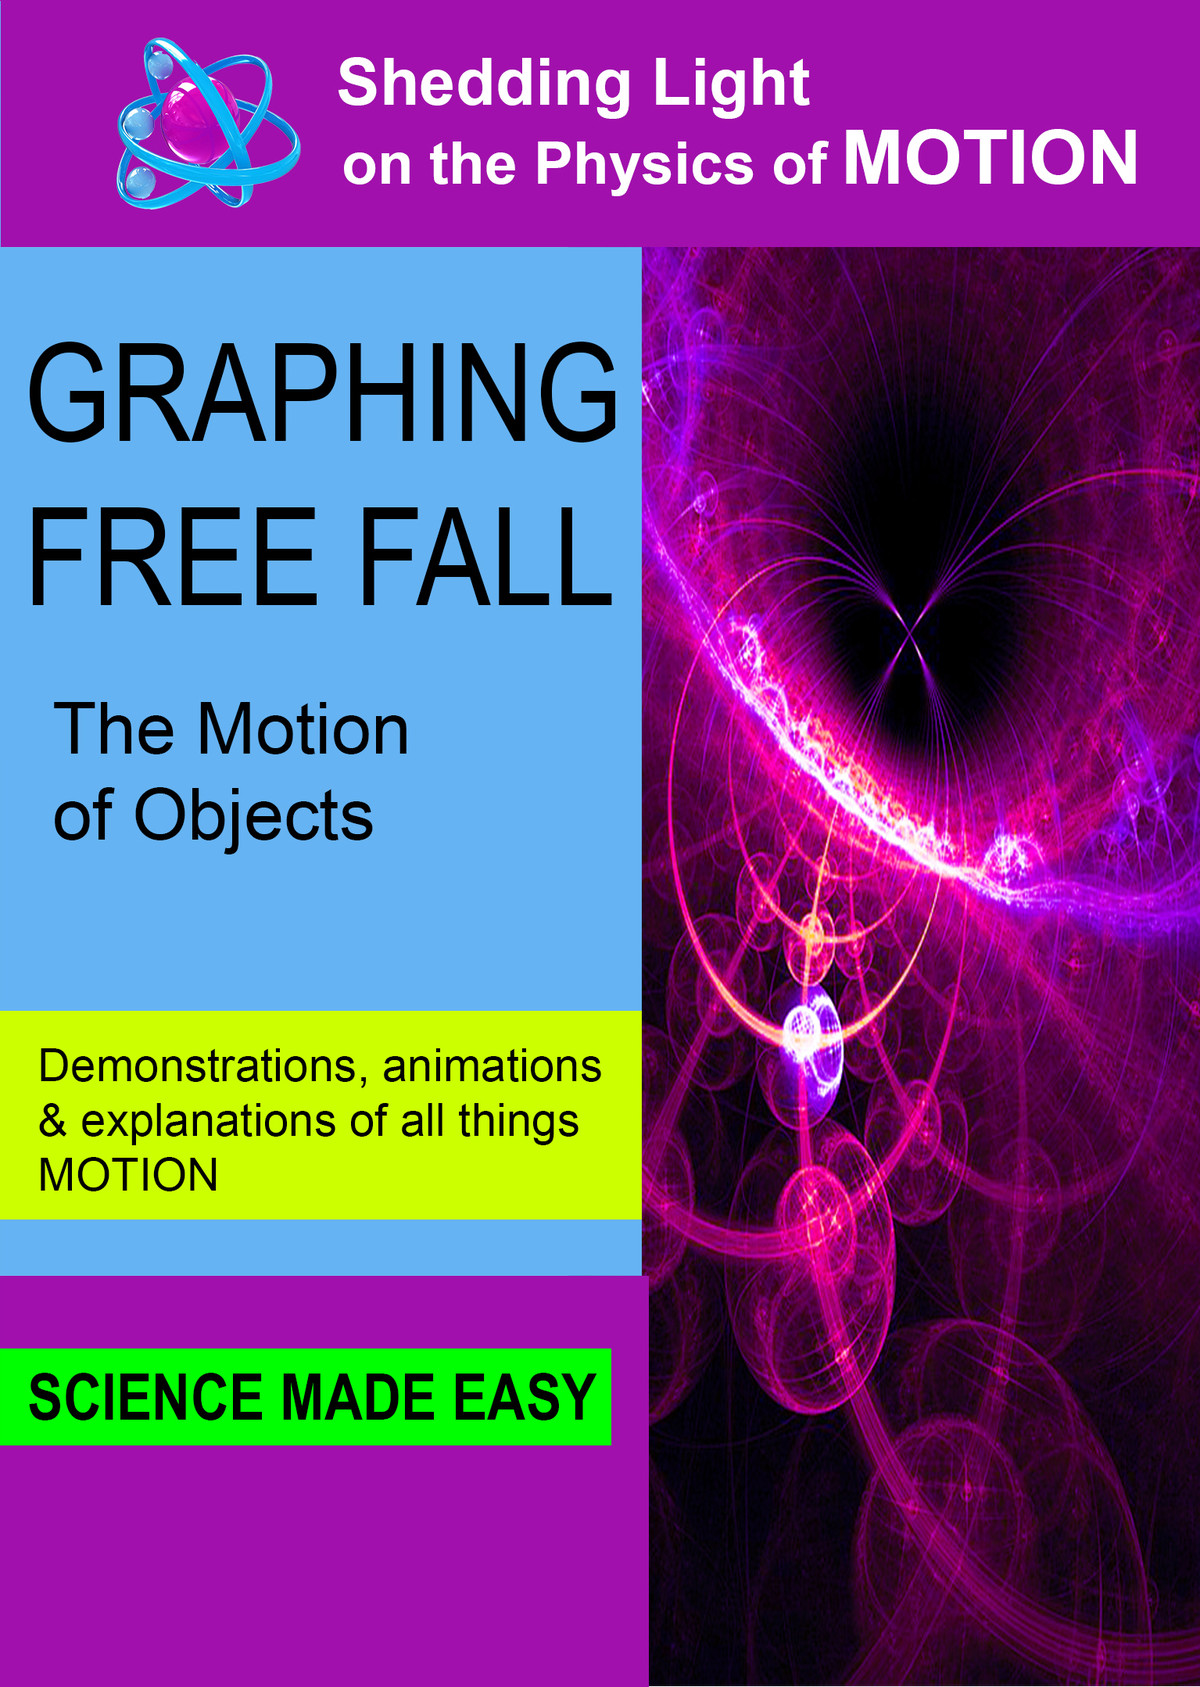 K4805 - Shedding Light on Motion Graphing Free Fall